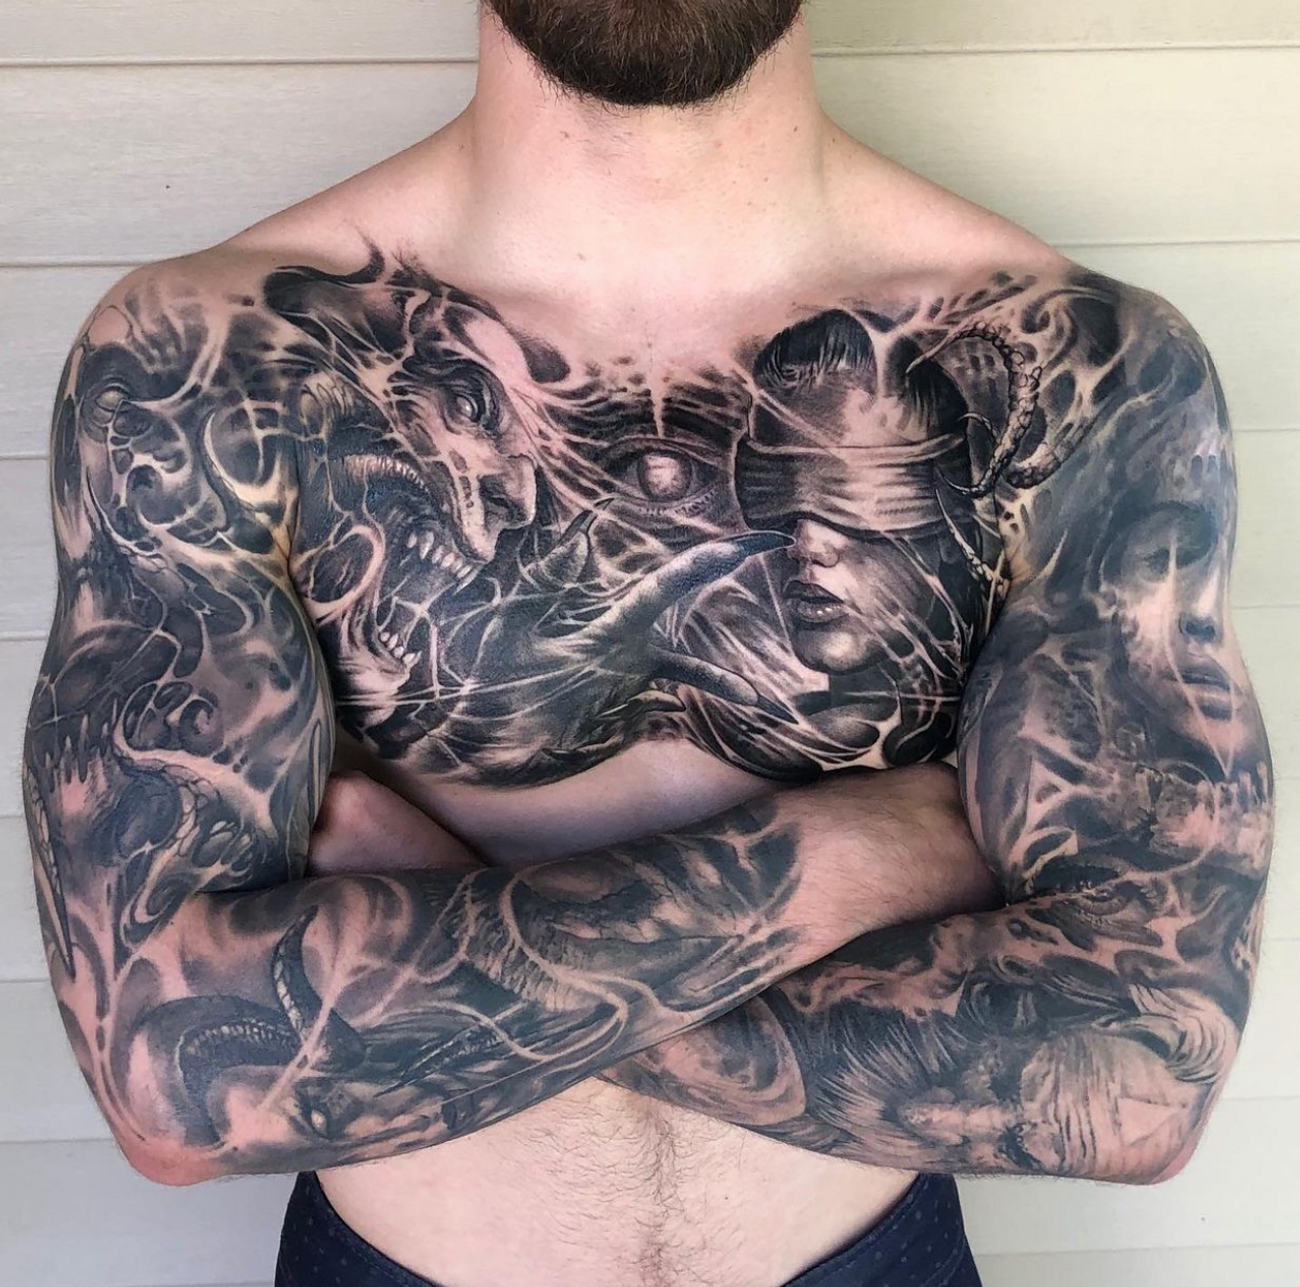 ["Inner Forearm", "Chest and Arm Sleeves", "Elbow/Arm", "Chest", "Side/Rib Cage"]